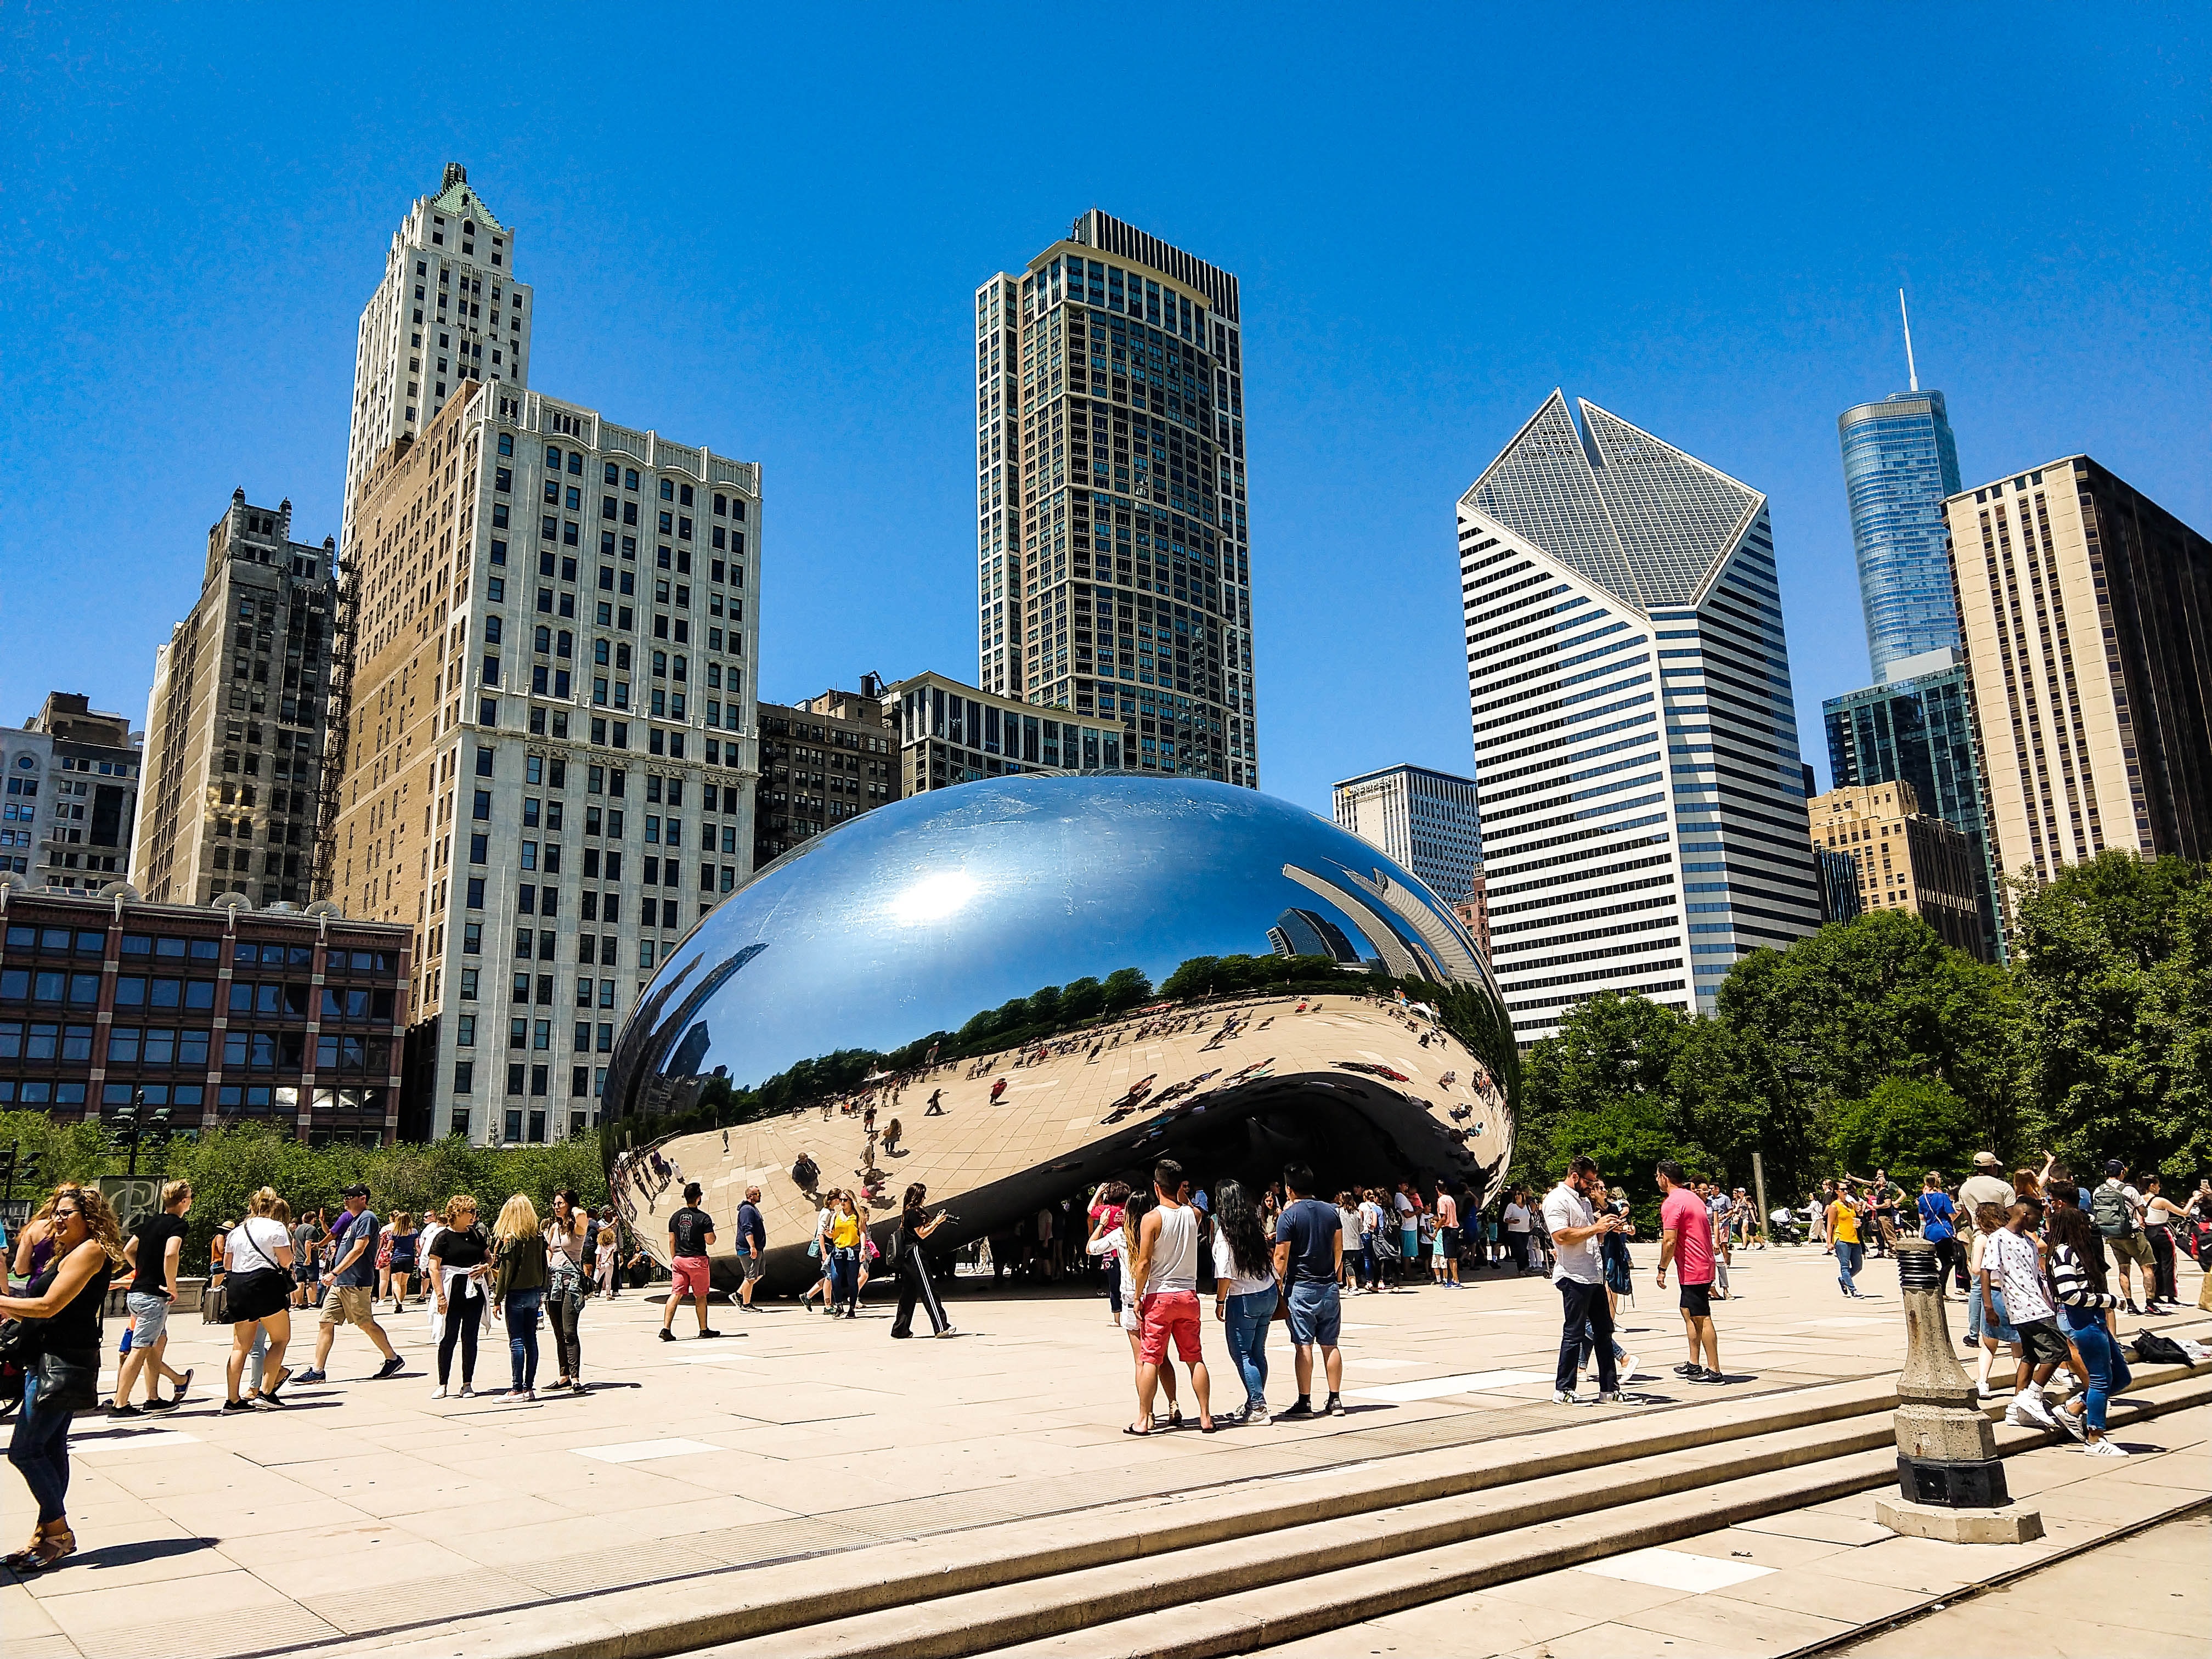 Fan Facts About the Bean Chicago